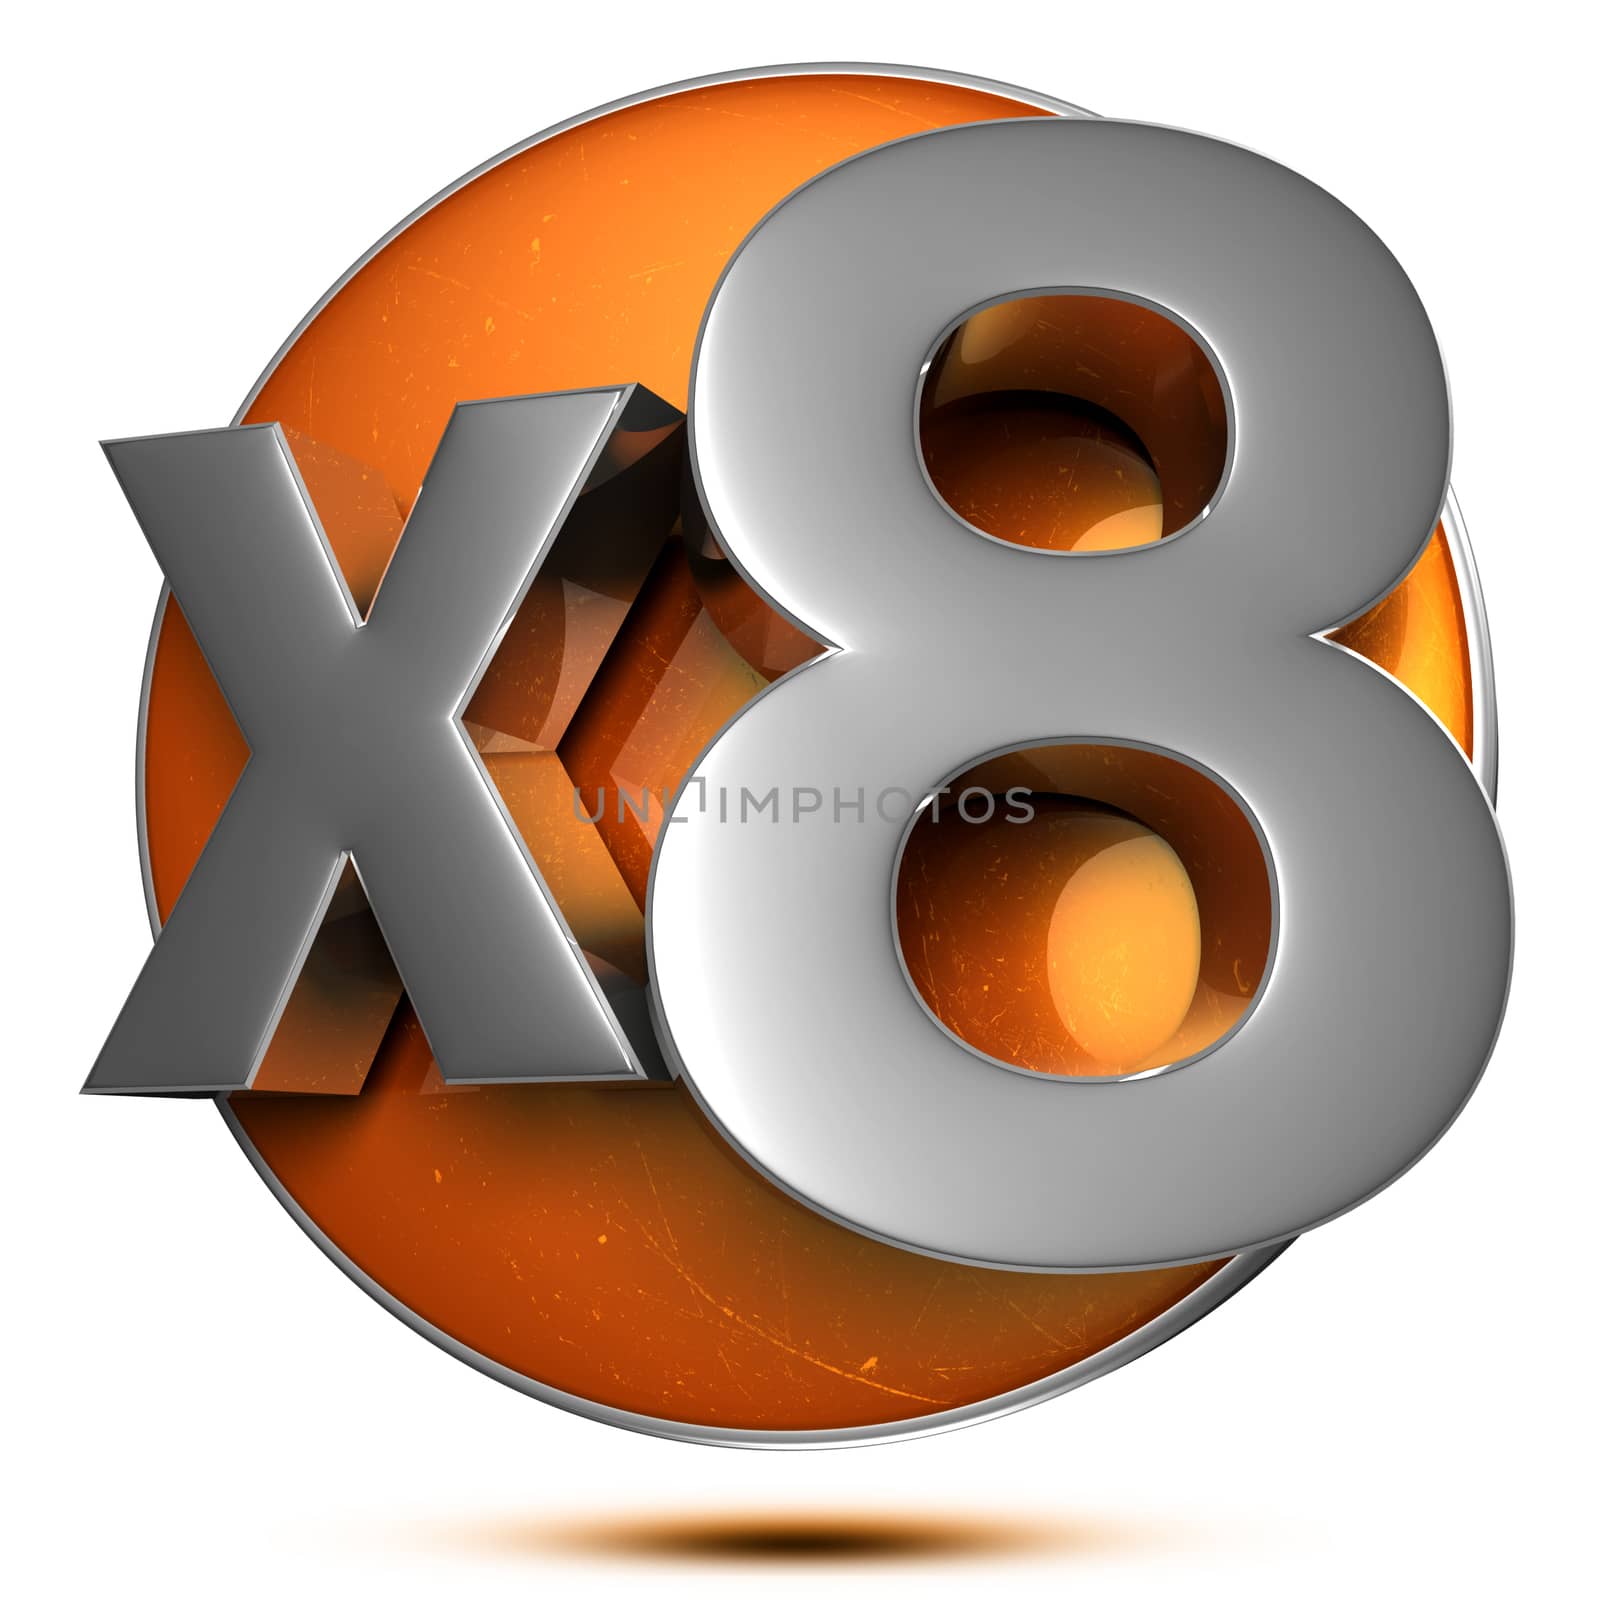 x8 3d rendering on the orange circle behind the white background .(with Clipping Path).